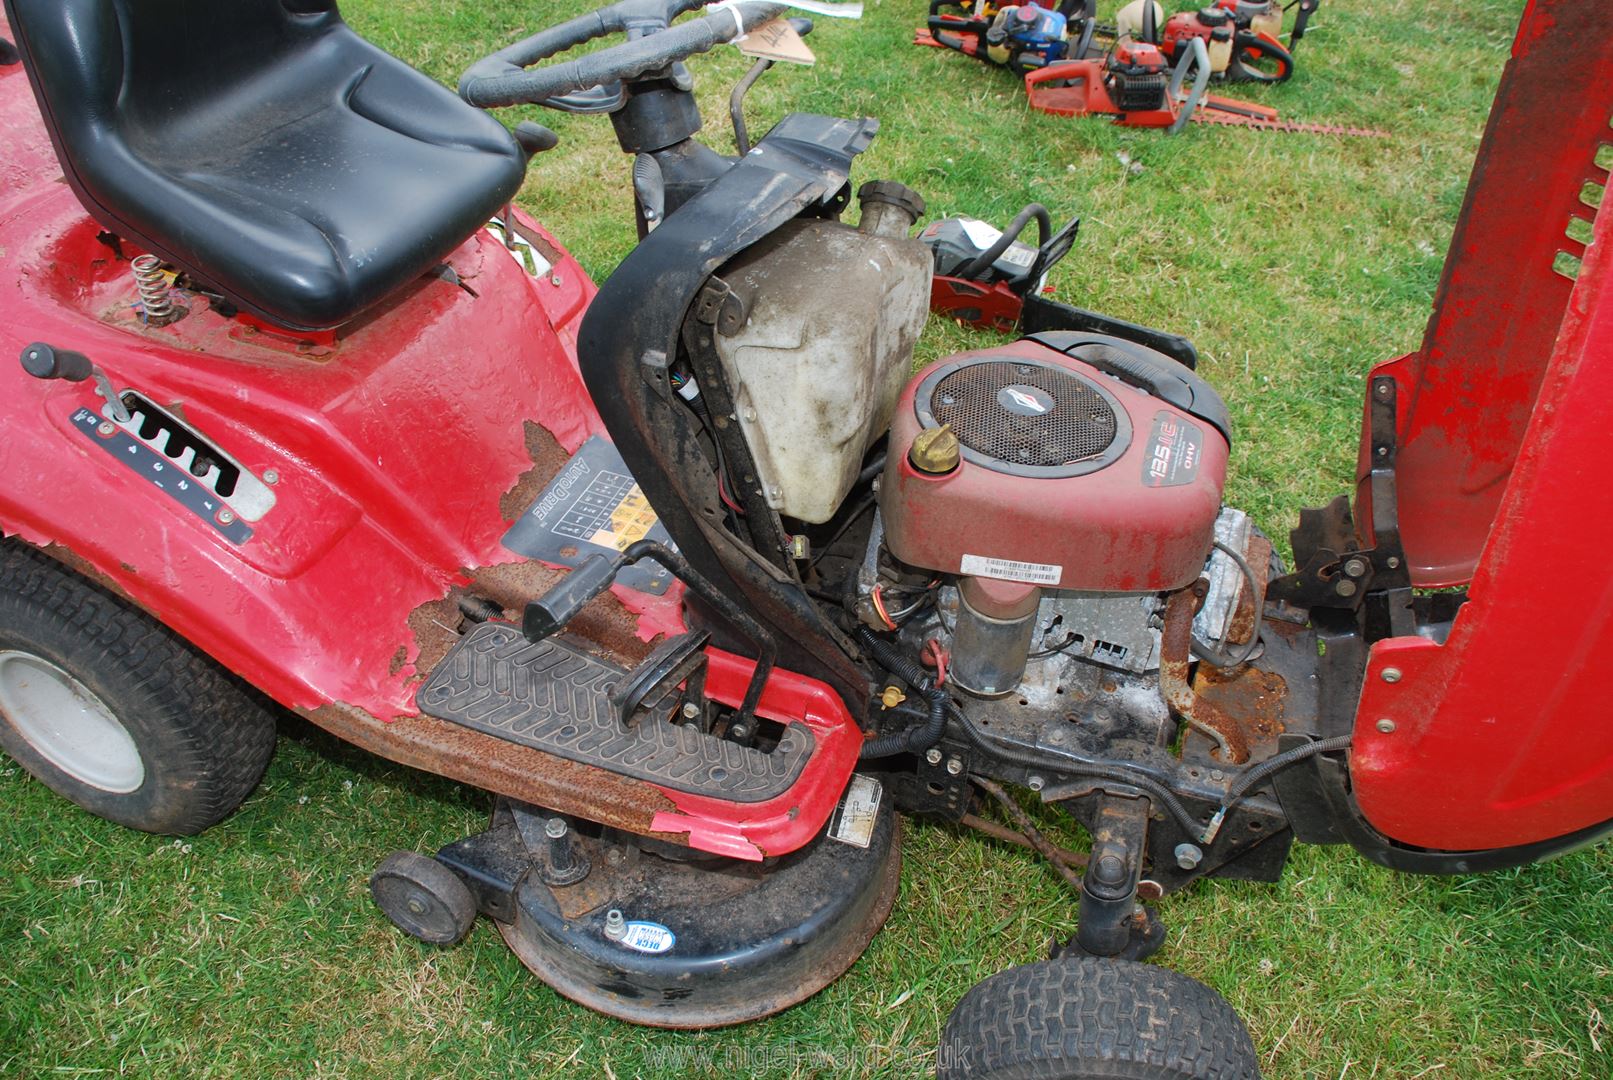 A Lawn-flite Ride-on mower with Briggs & Stratton 13.5 hp overhead valve engine. - Image 3 of 4